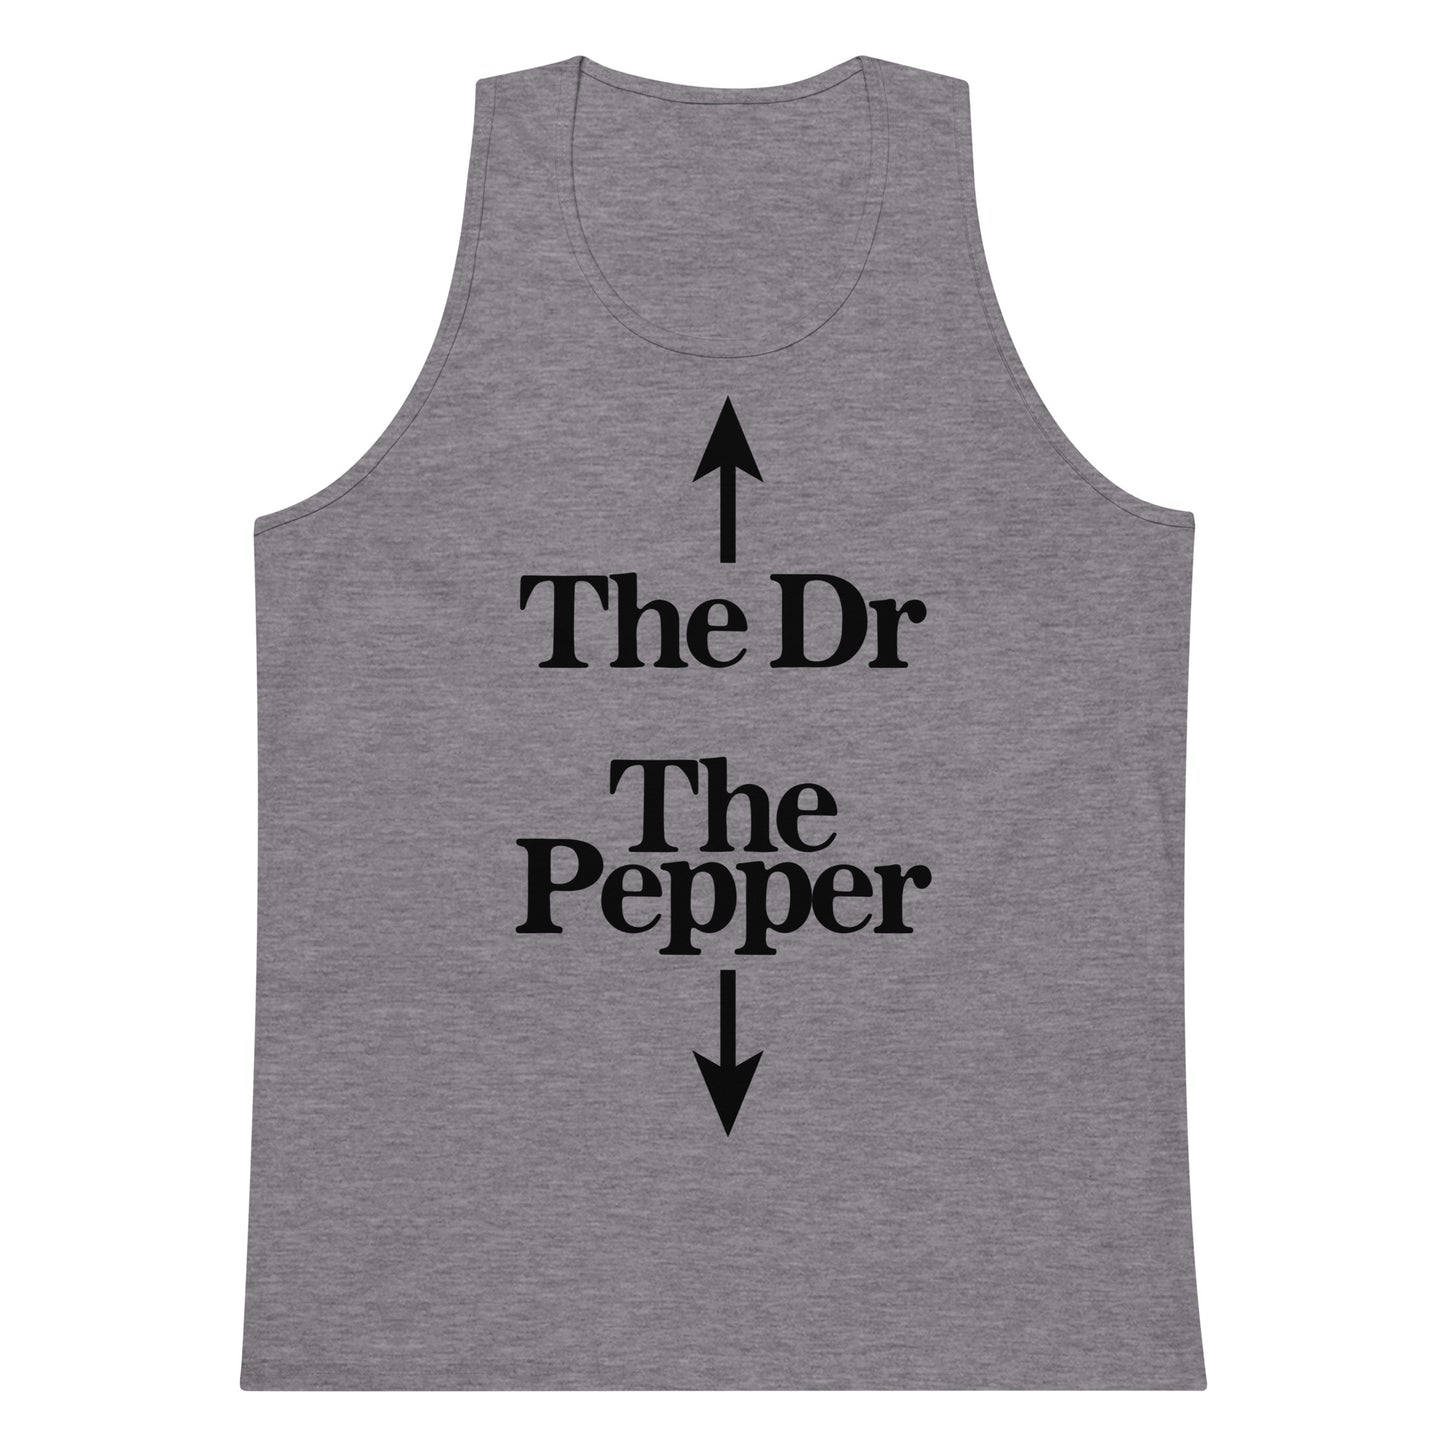 The Dr The Pepper tank top